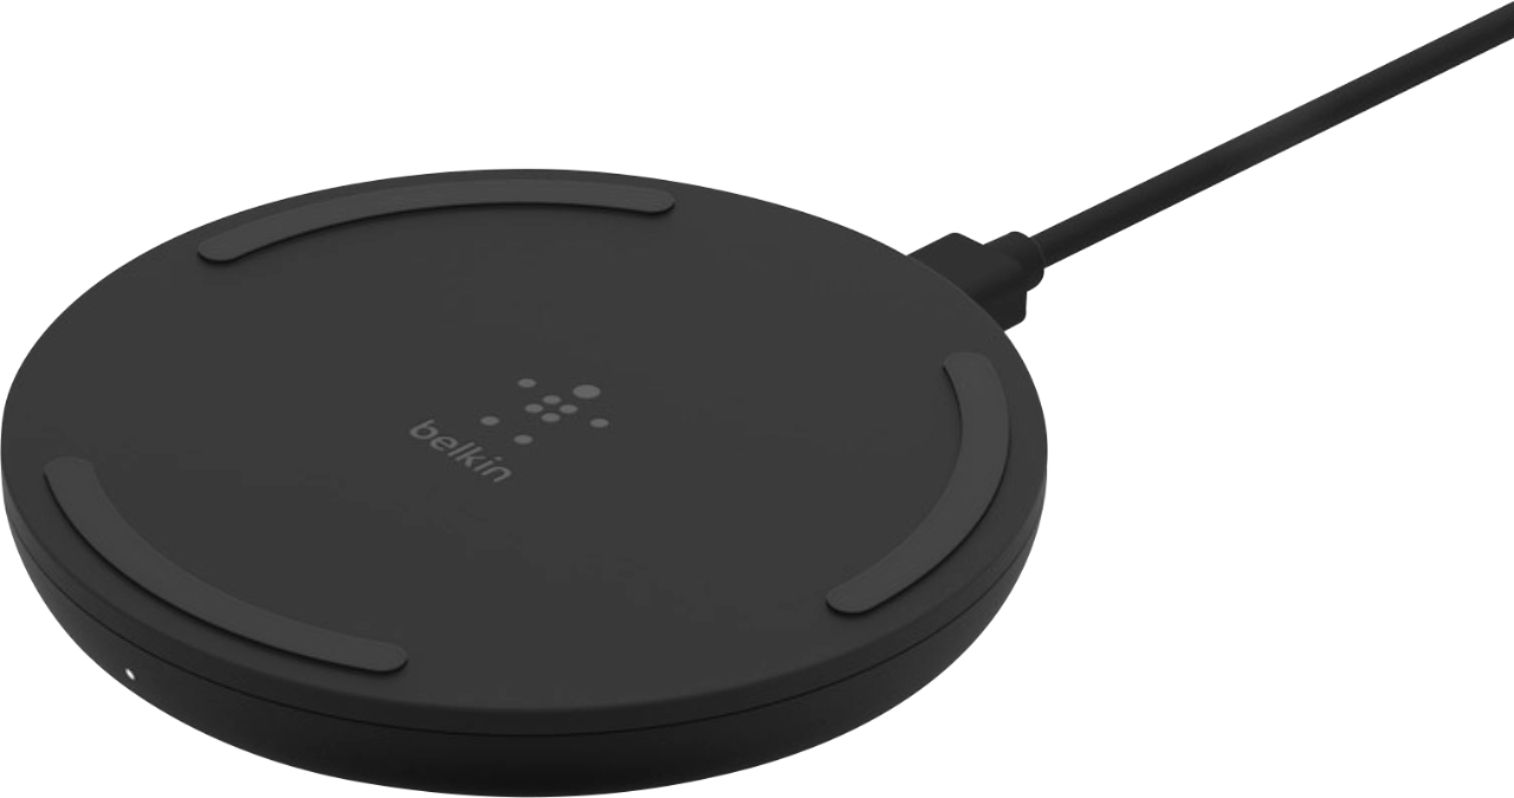 Belkin BOOSTCHARGE Dual Wireless Charging Pads, Charging up to 10W, Black 